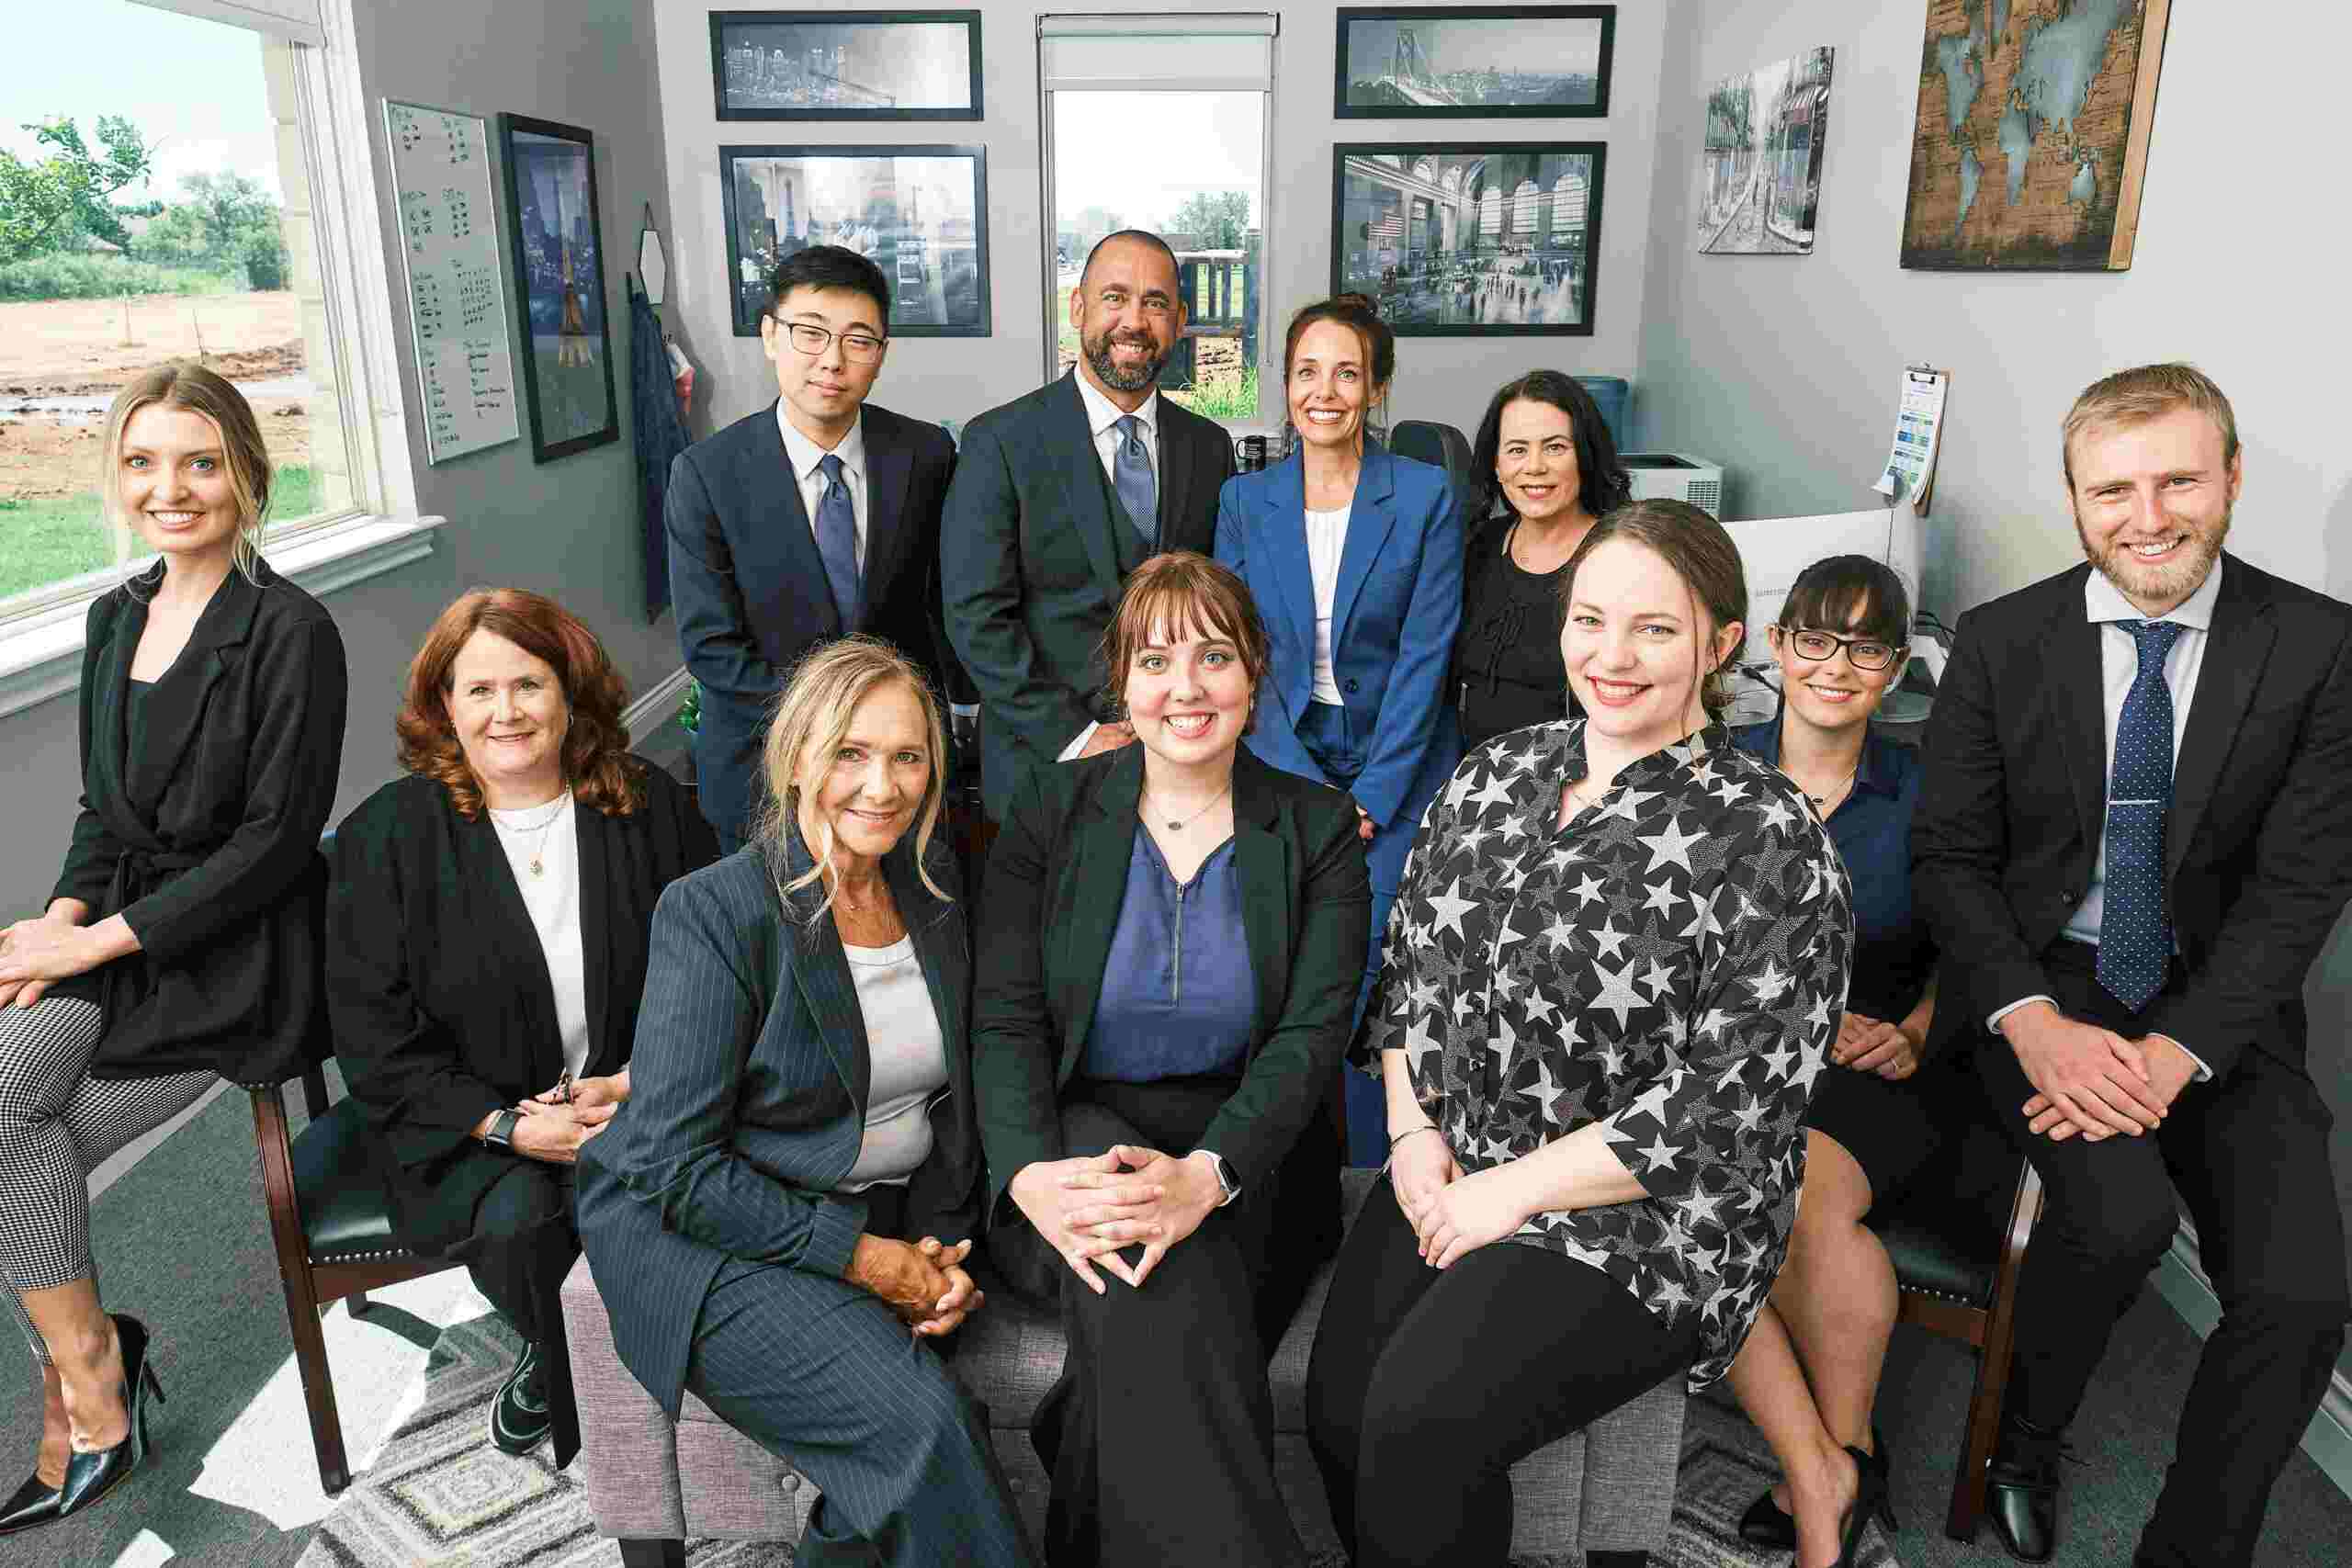 A group shot of the Vertices accounting, tax, and business consulting team in professional attire